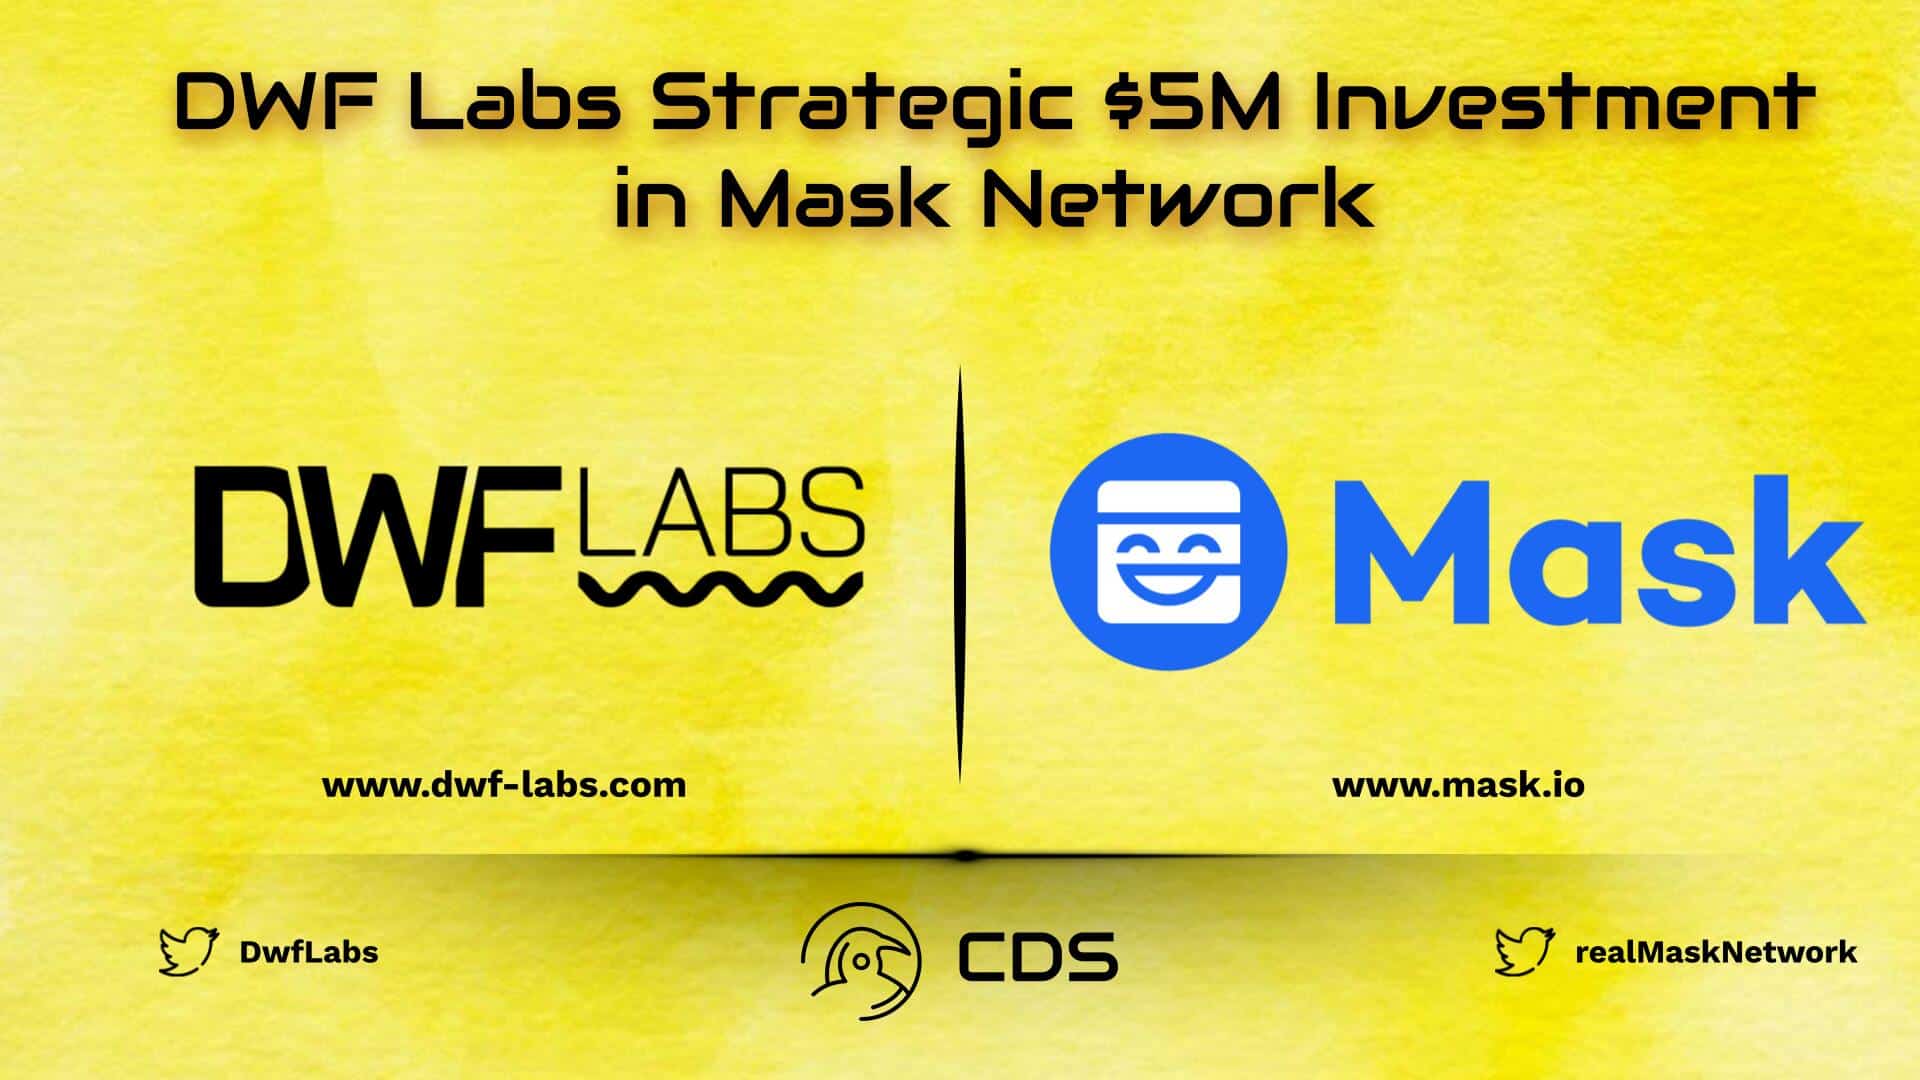 DWF Labs Strategic $5M Investment in Mask Network